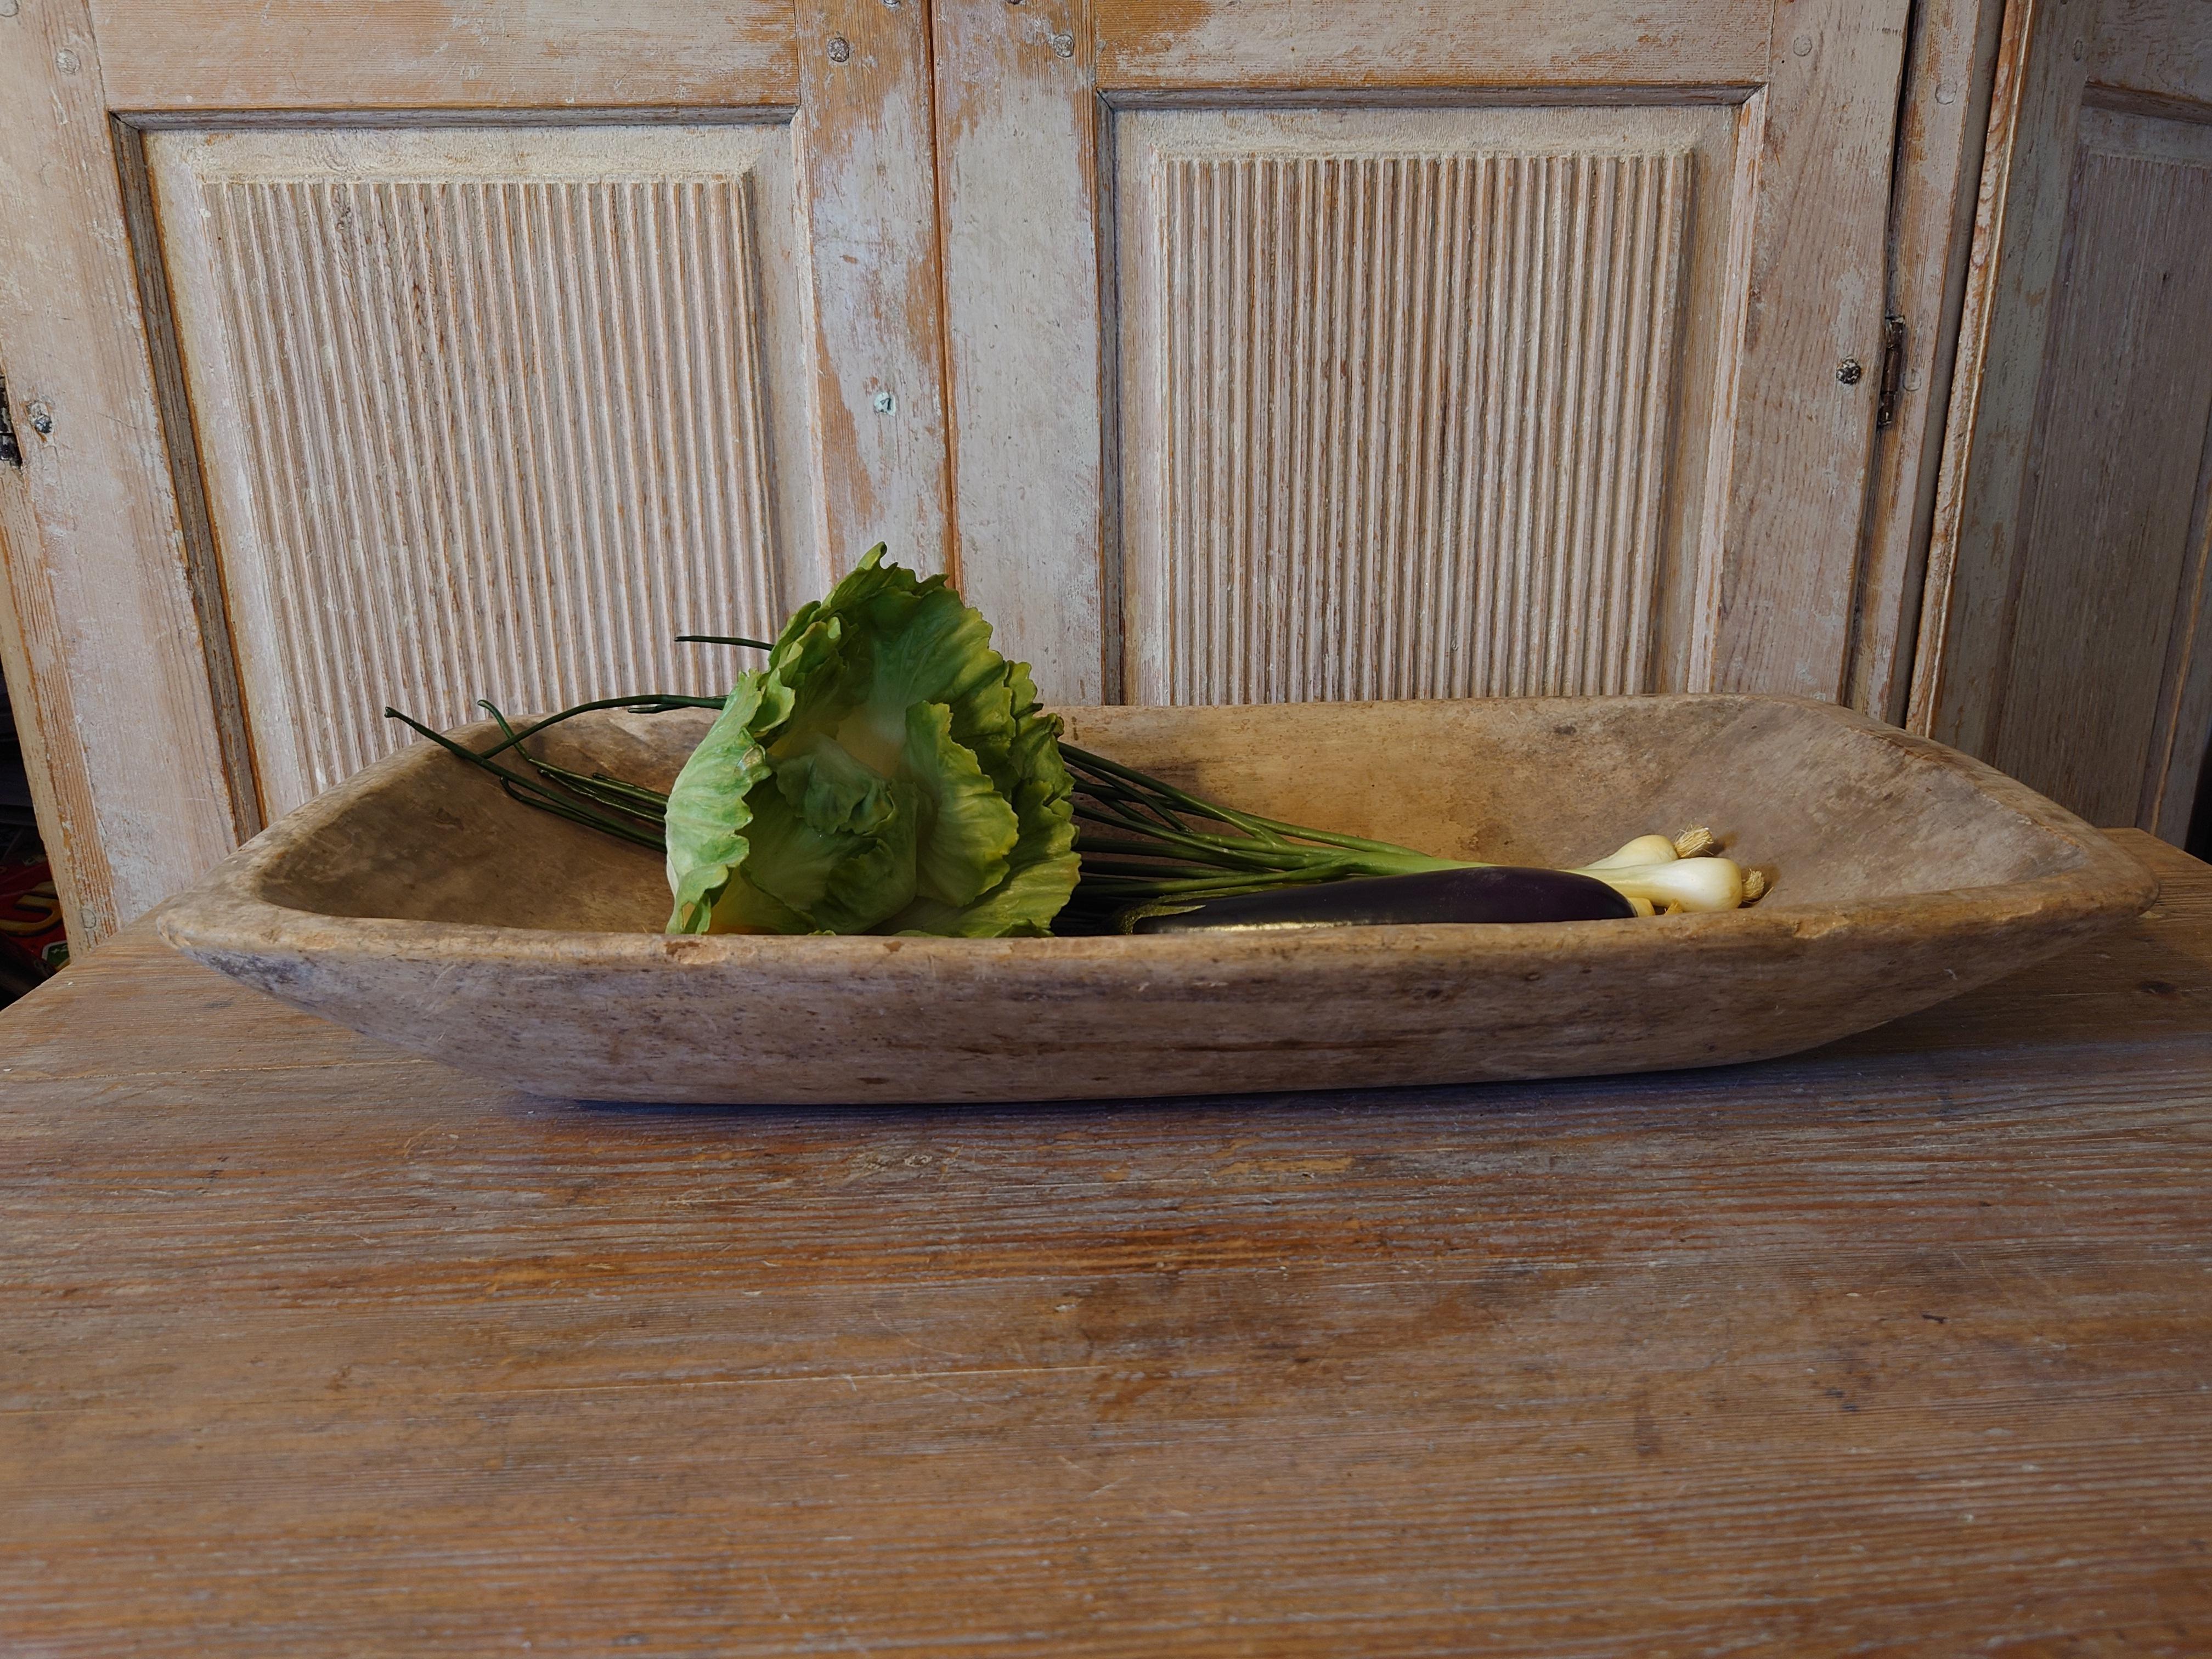 19th century big rustic Swedish antique wooden tray/  Serving bowl from Boden Norrbotten,Northern Sweden.
A farmers handcrafted tray or serving bowl or centerpiece.
A highly functional object with sculptural appearance.
Time has patinated the